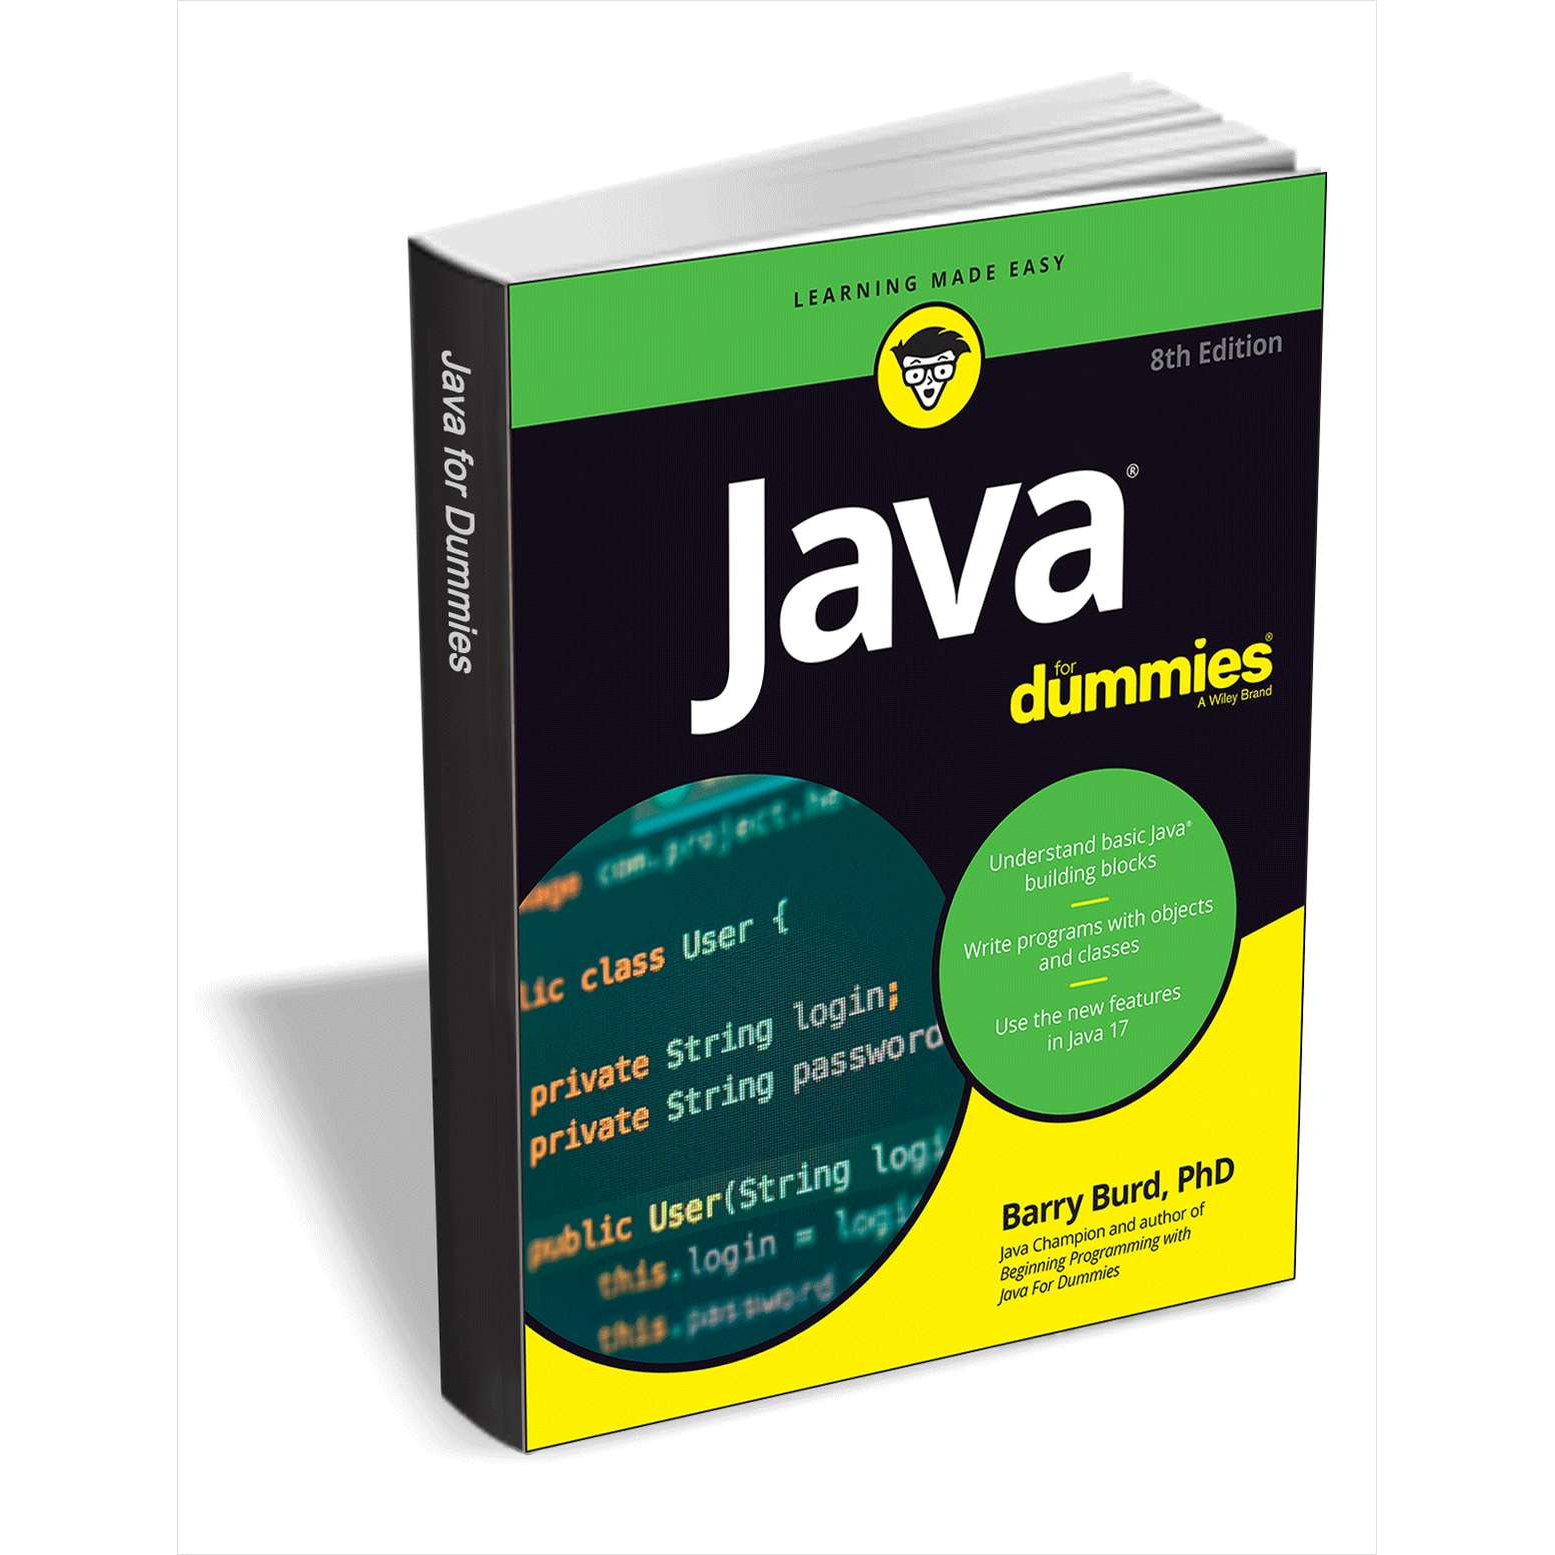 java-for-dummies-8th-edition-1800-value-